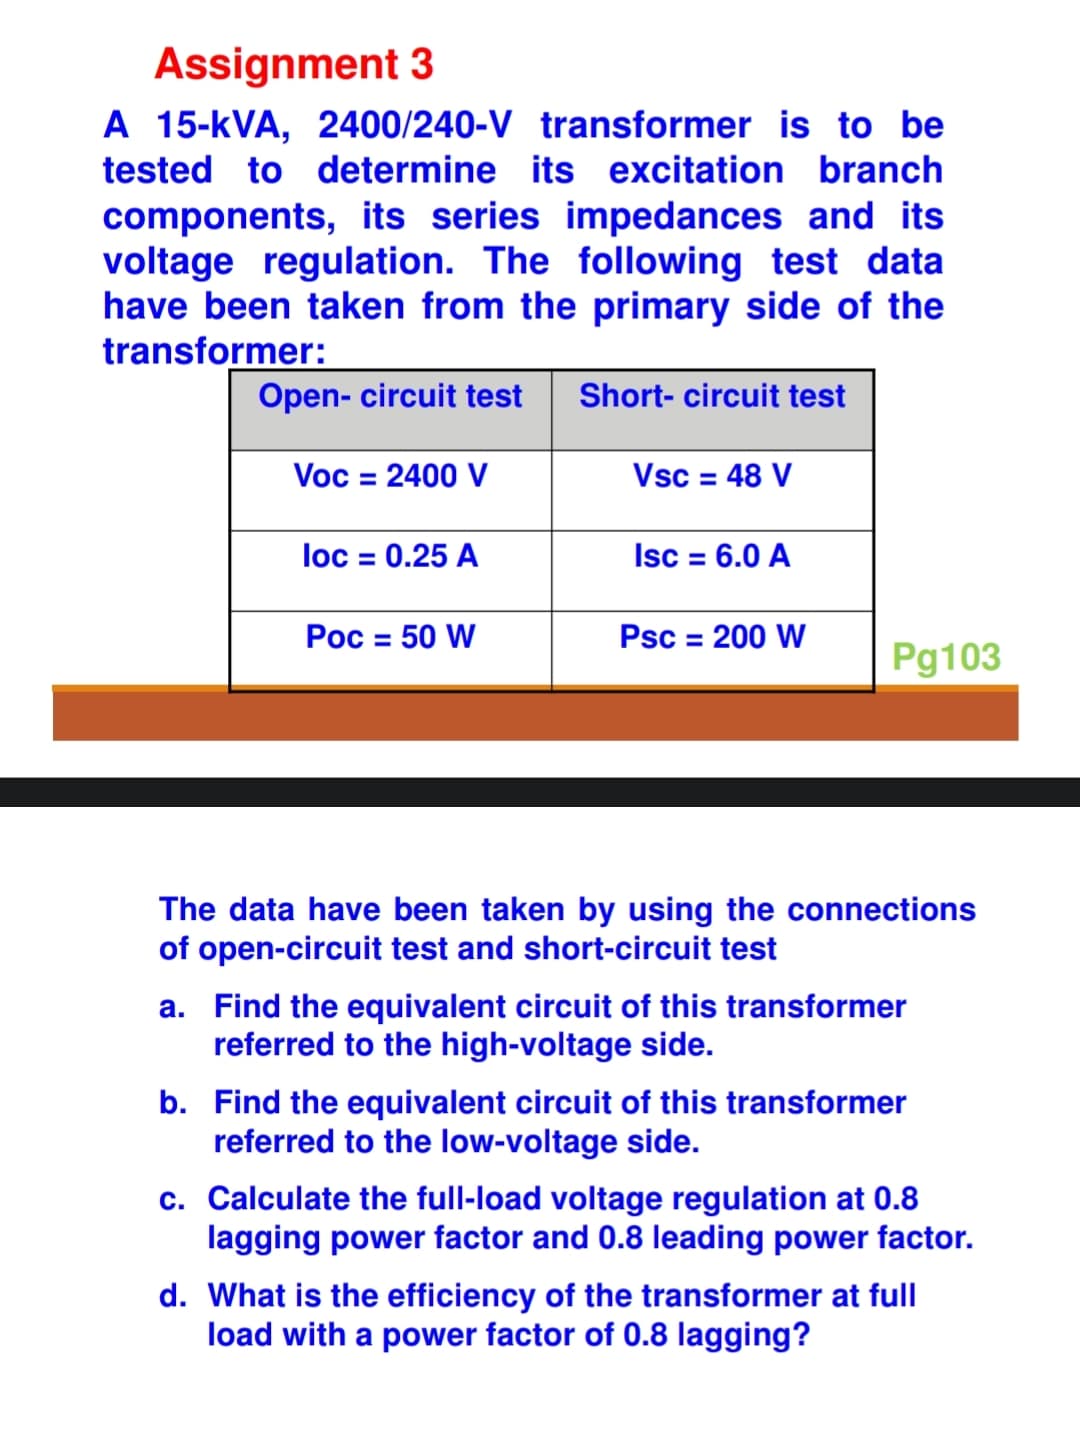 Assignment 3
A 15-KVA, 2400/240-V transformer is to be
tested to determine its excitation branch
components, its series impedances and its
voltage regulation. The following test data
have been taken from the primary side of the
transformer:
Short-circuit test
Open- circuit test
Voc = 2400 V
loc = 0.25 A
Poc = 50 W
Vsc = 48 V
Isc = 6.0 A
Psc = 200 W
Pg103
The data have been taken by using the connections
of open-circuit test and short-circuit test
a. Find the equivalent circuit of this transformer
referred to the high-voltage side.
b. Find the equivalent circuit of this transformer
referred to the low-voltage side.
c. Calculate the full-load voltage regulation at 0.8
lagging power factor and 0.8 leading power factor.
d. What is the efficiency of the transformer at full
load with a power factor of 0.8 lagging?